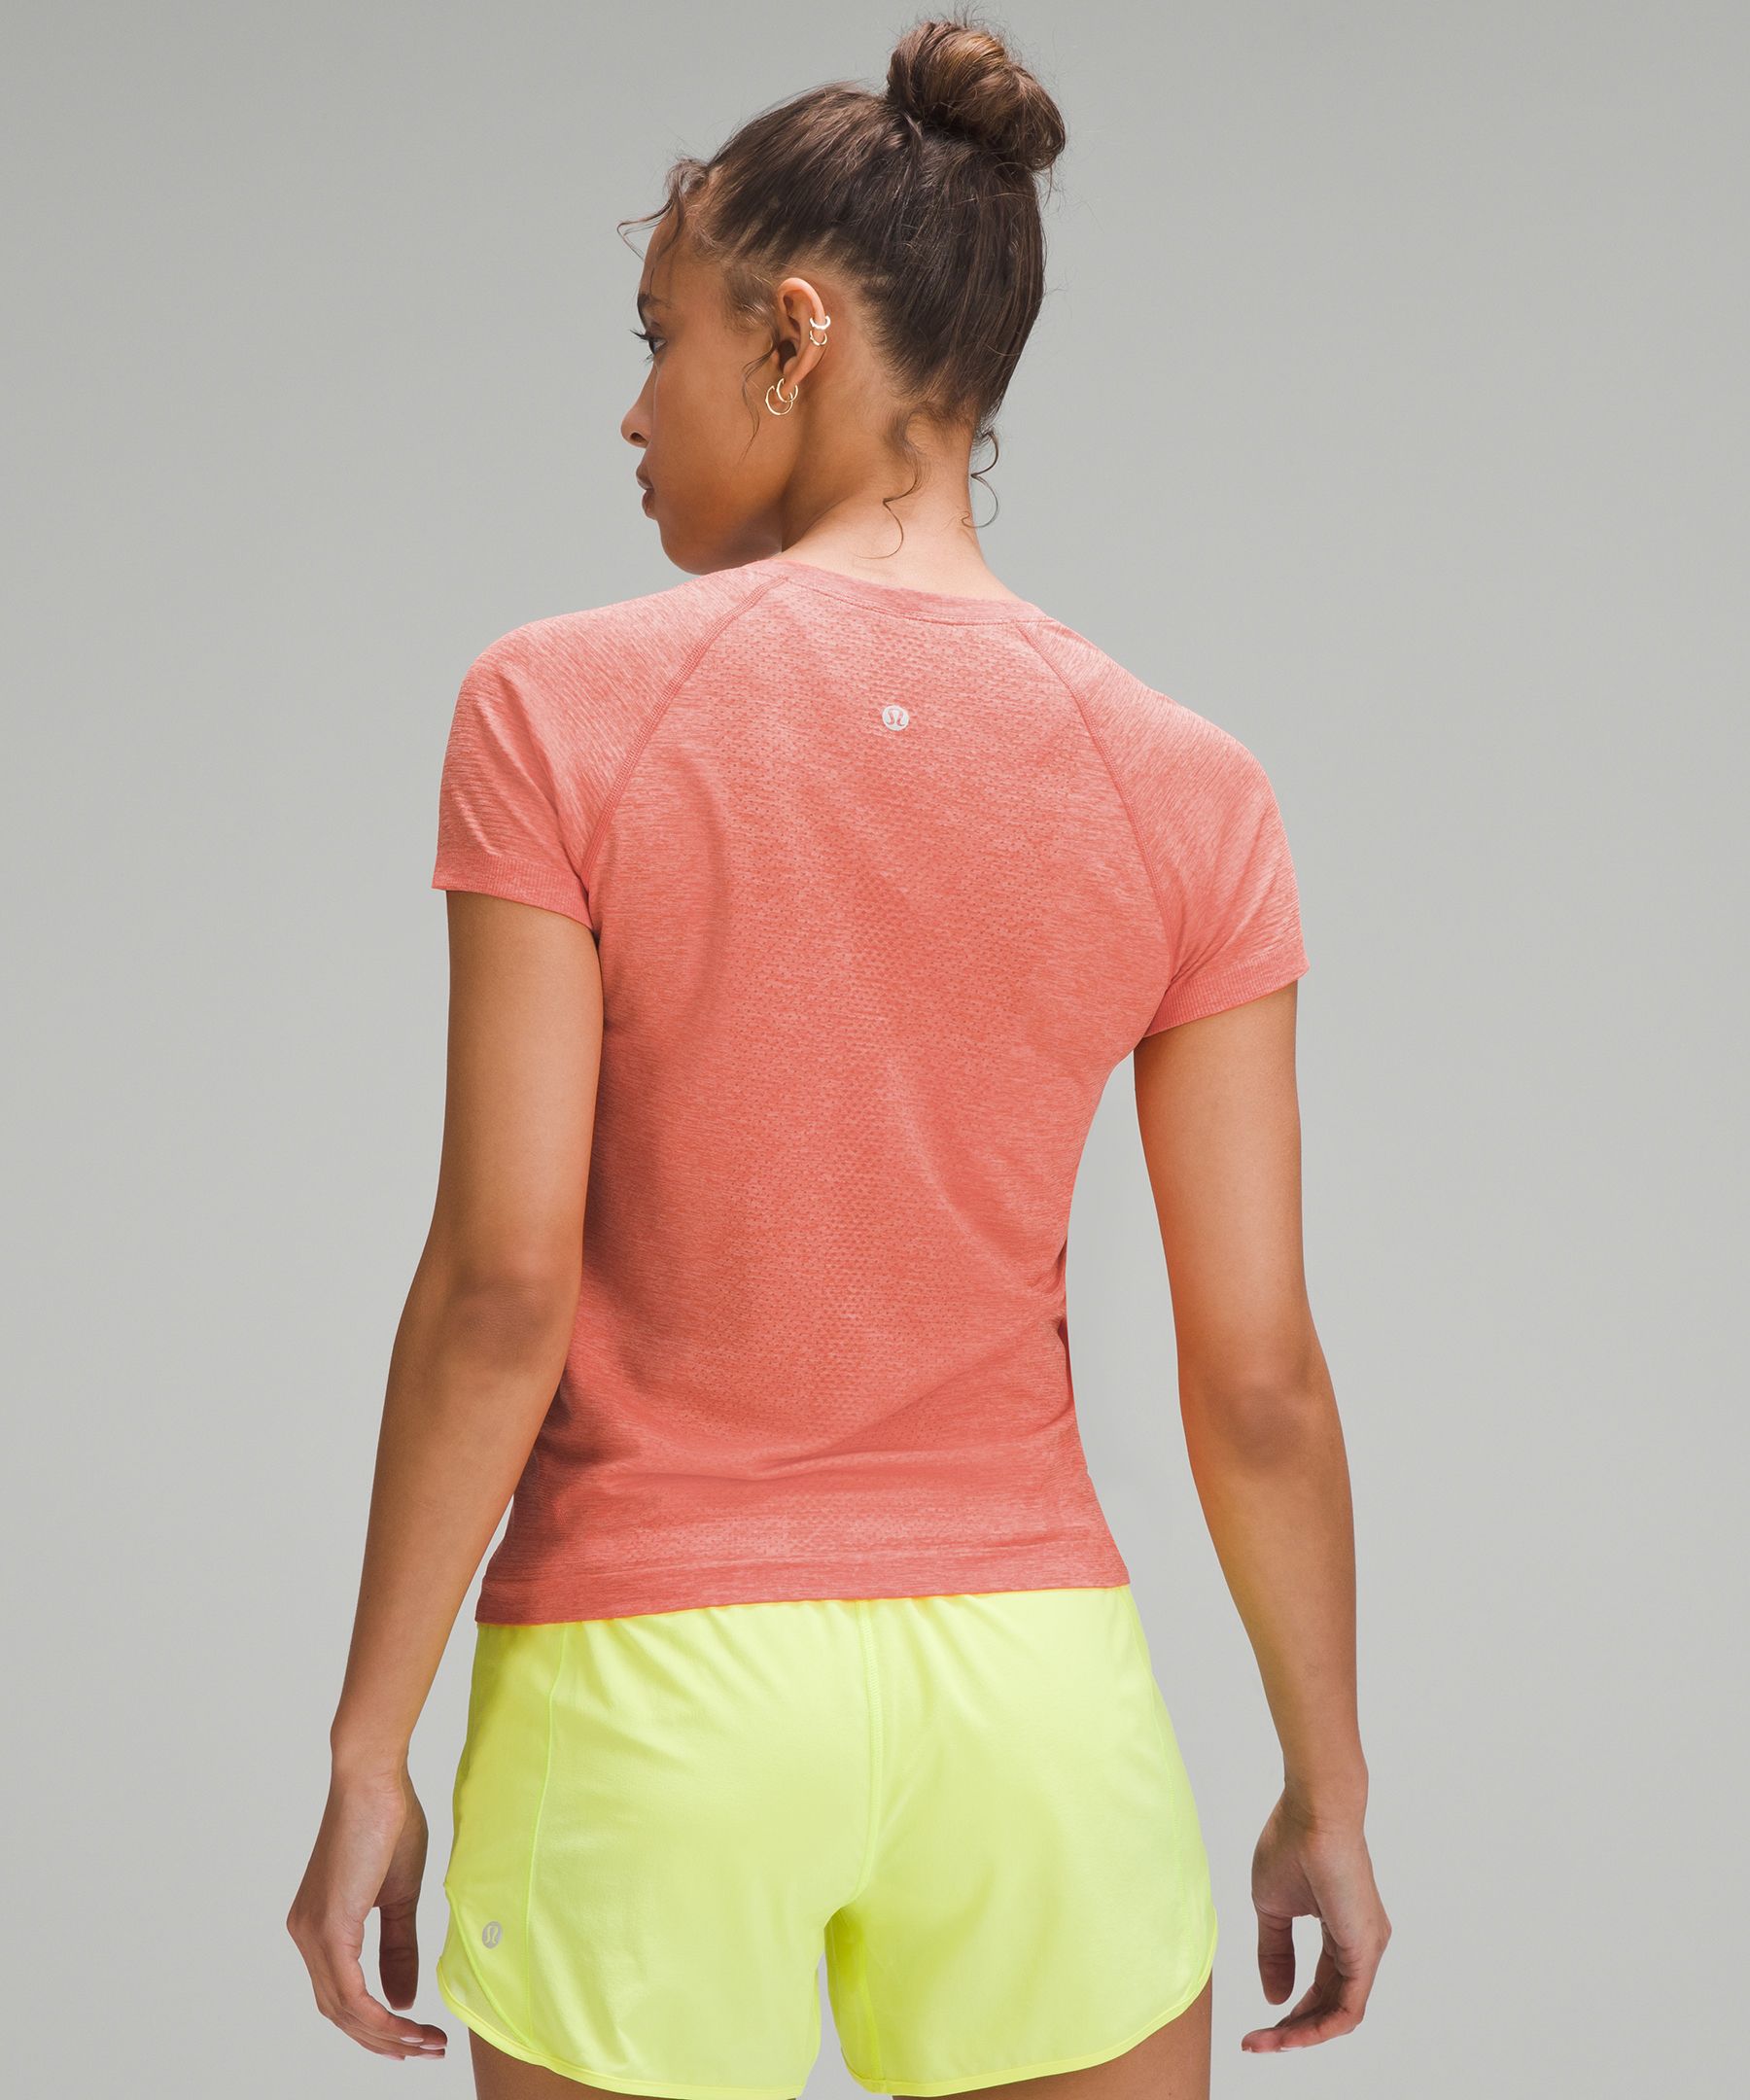 Lululemon Old Style Swiftly Tech Orange Size 6 - $29 (57% Off Retail) -  From Remi